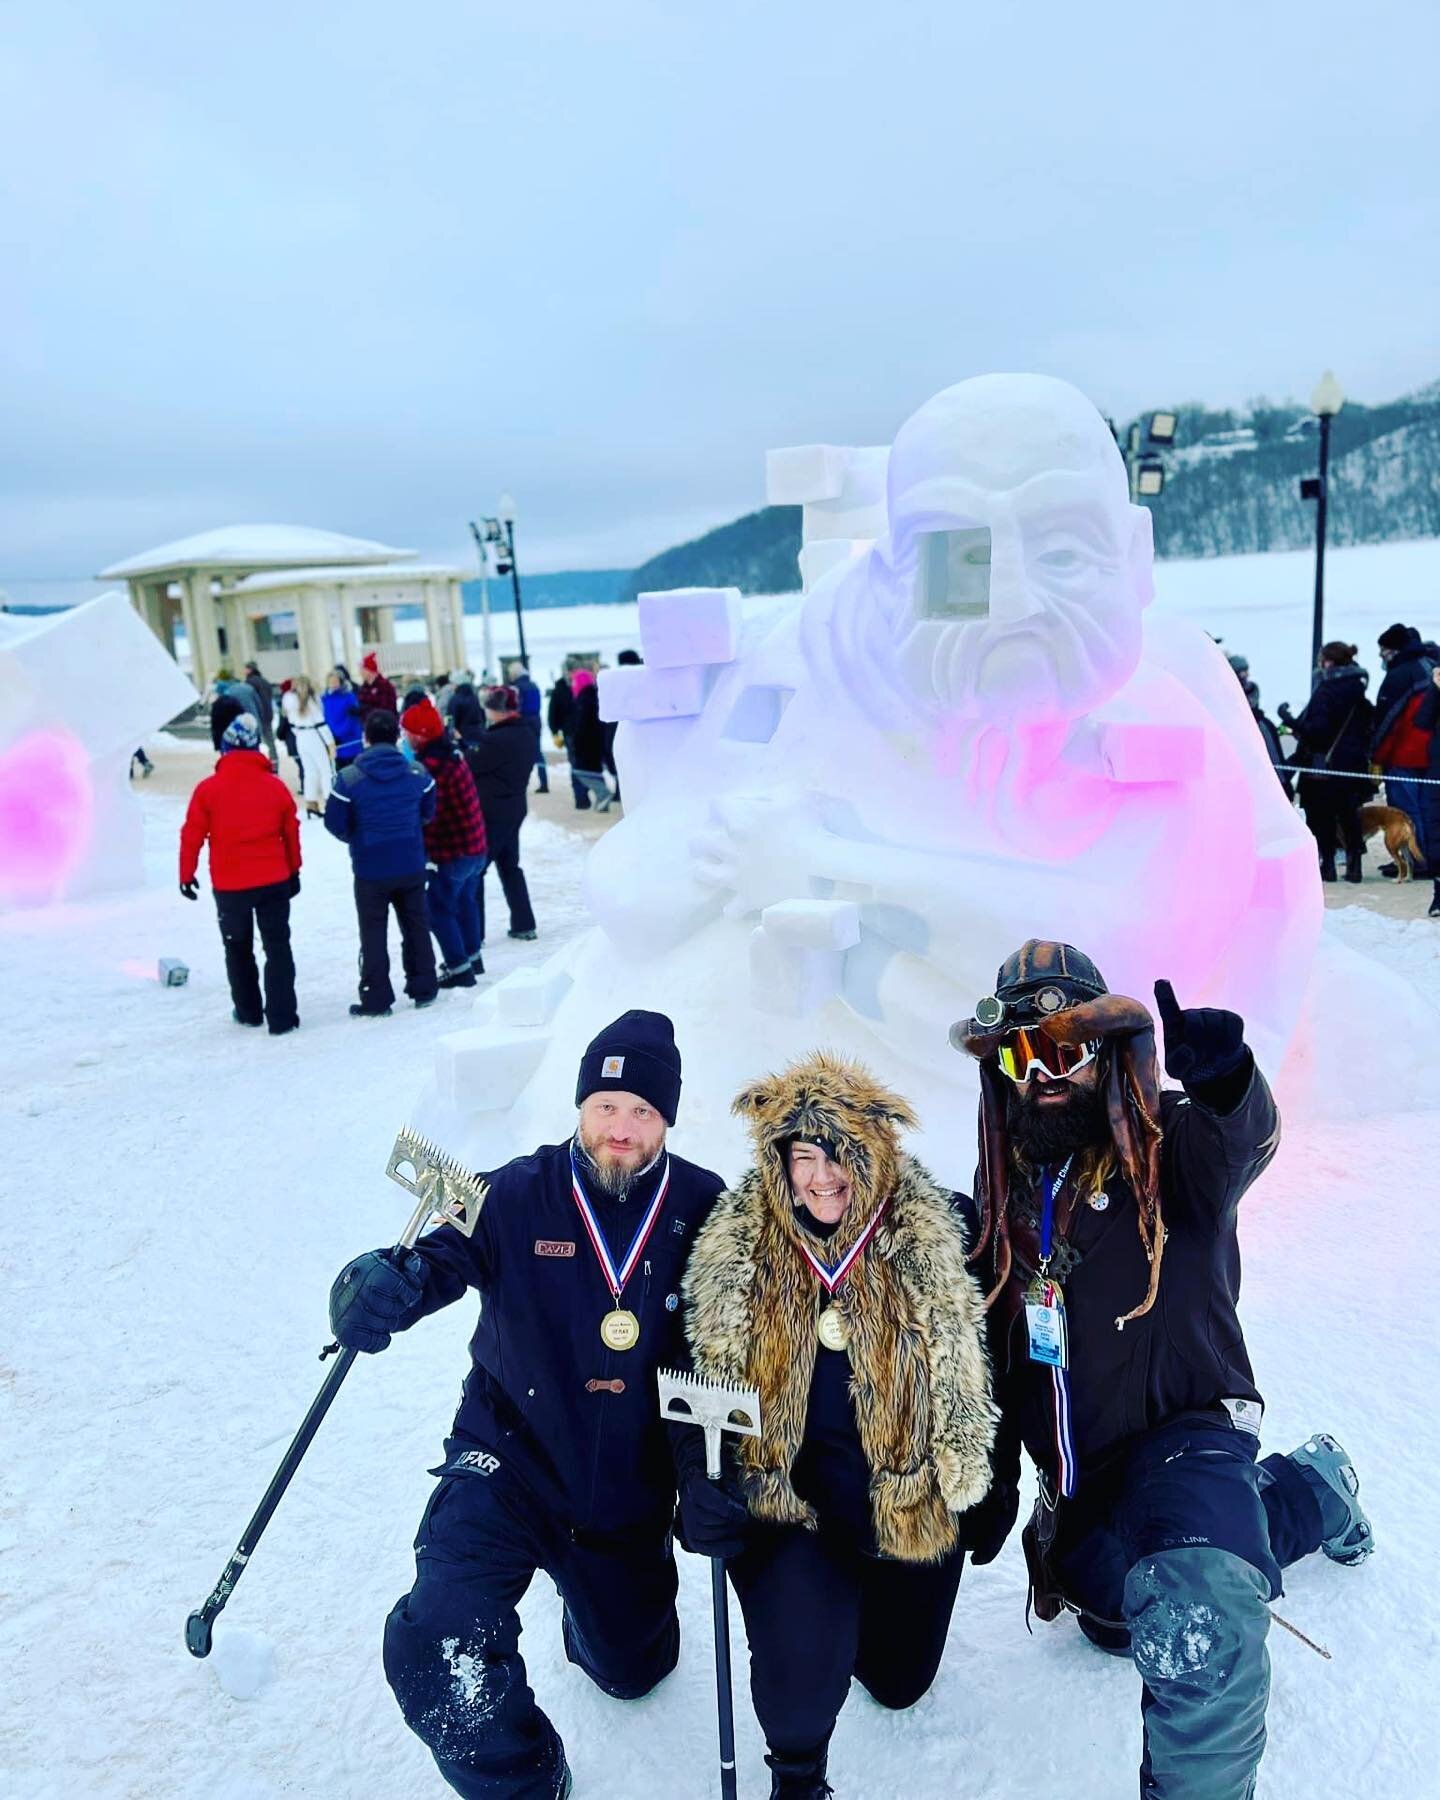 We did it! We took first place at the World Champion Snow Sculpting Competition in Stillwater! 

Bittersweet. A loss and a win all wrapped up in a weekend. 

#houseofthune #snow #snowsculpting